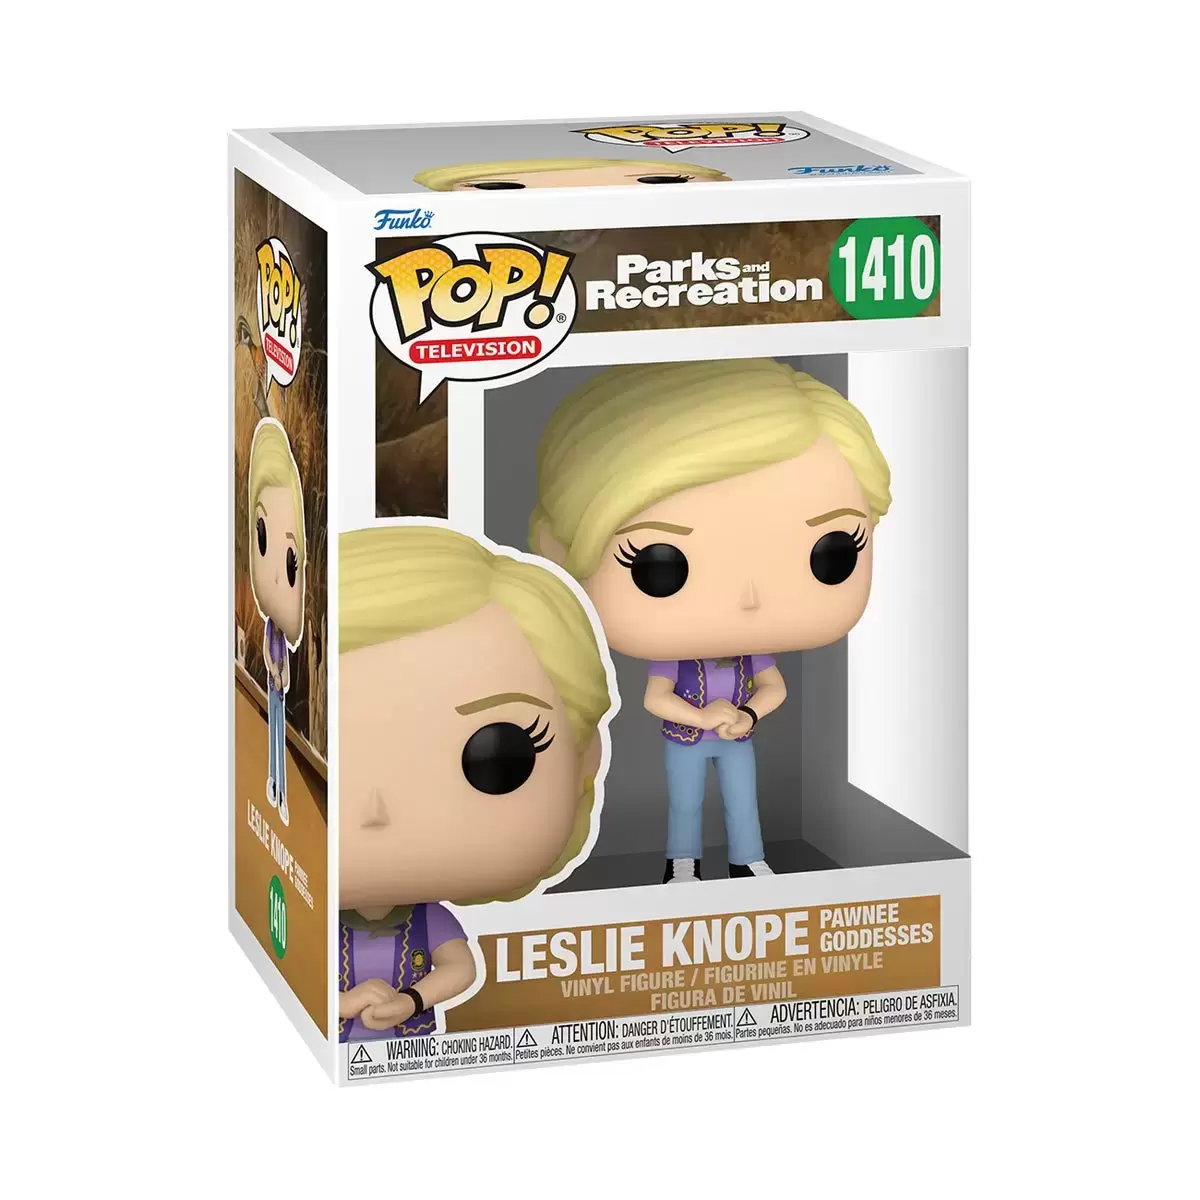 POP! Television - [COPY] Parks And Recreation - Andy Dwyer Pawnee Goddesses